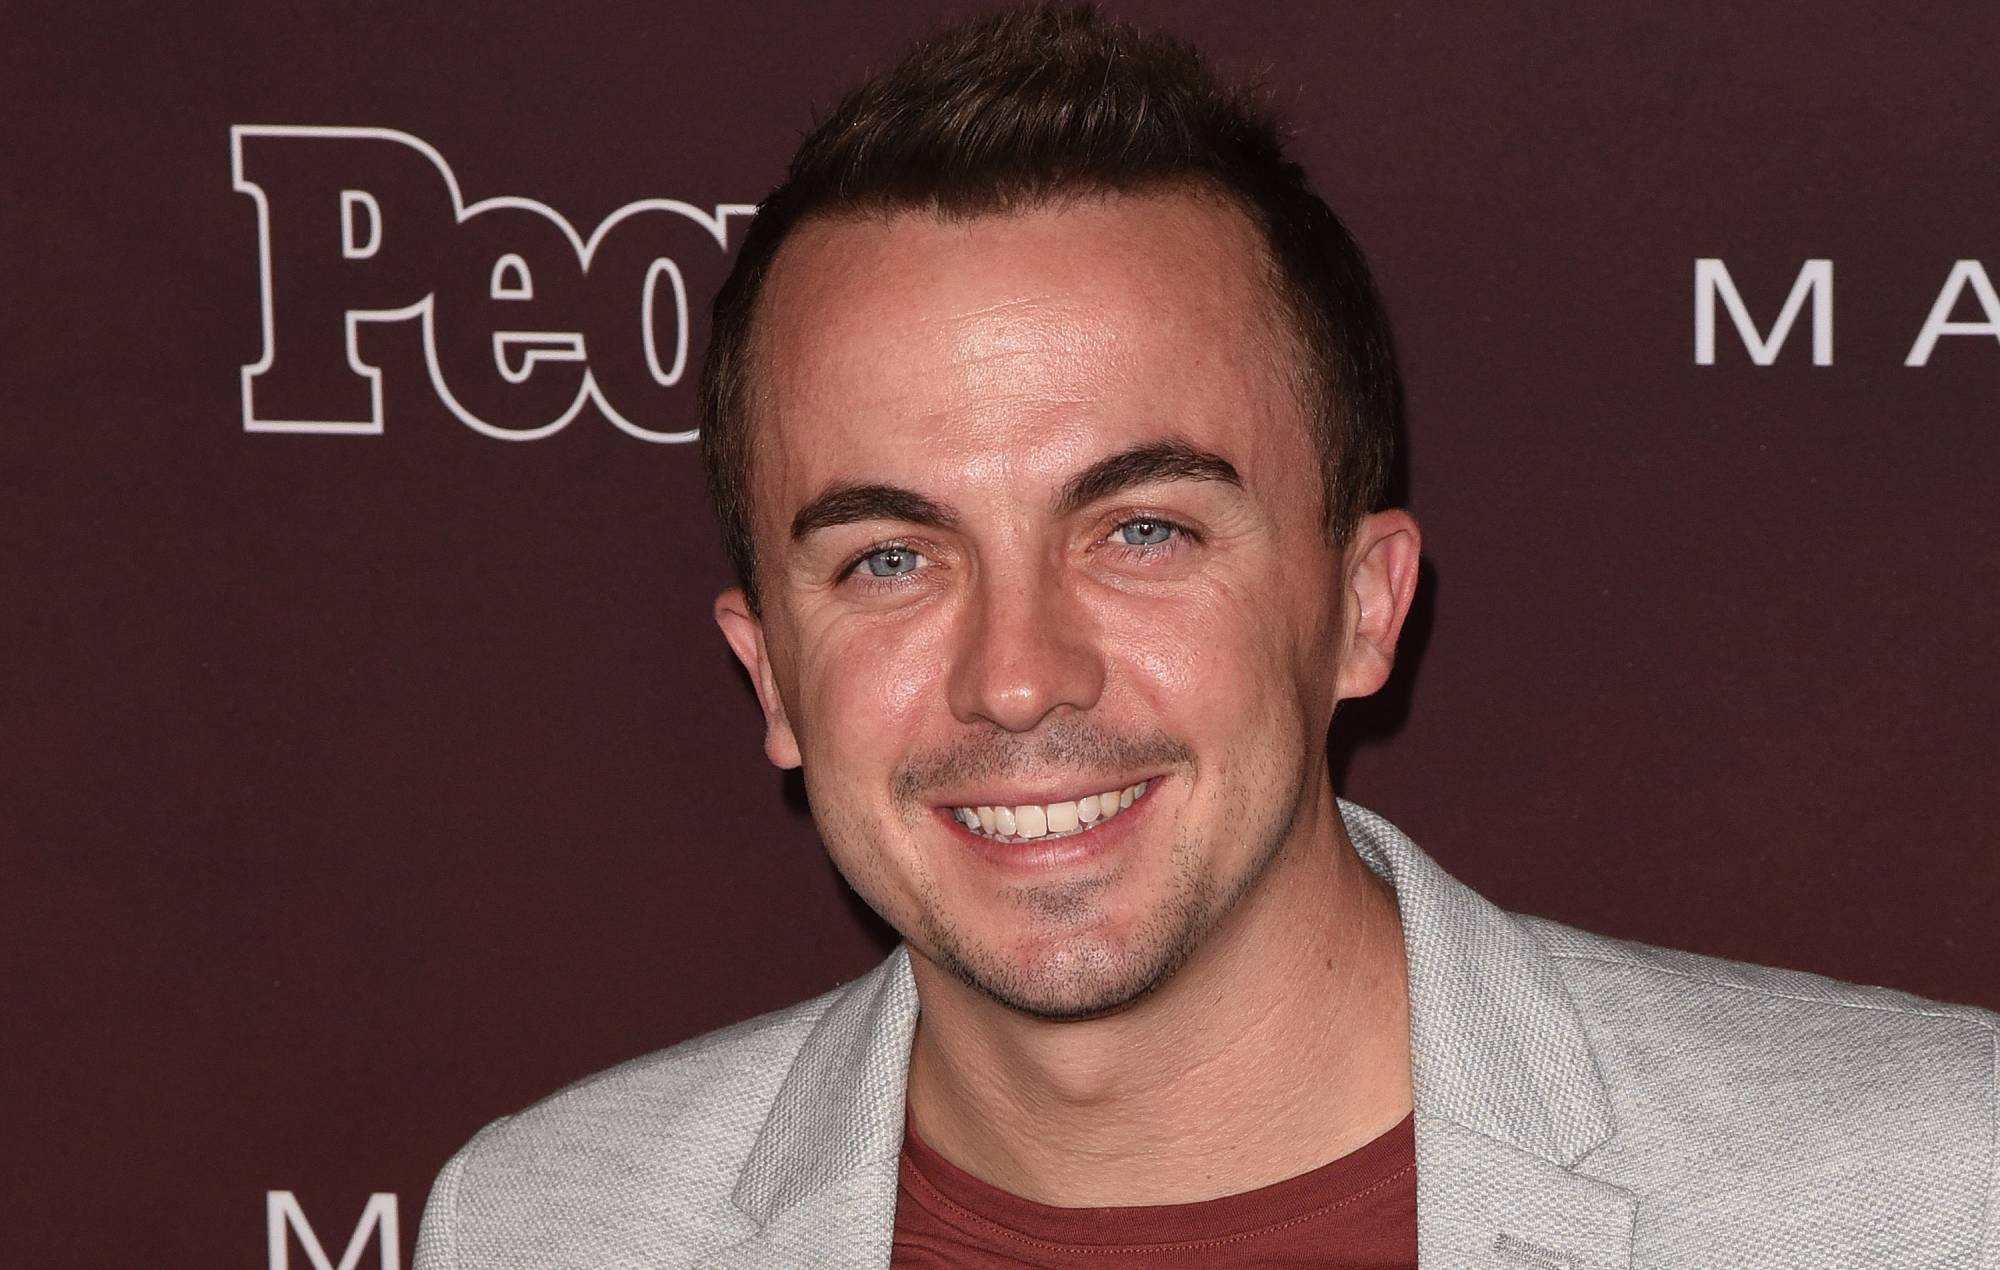 Frankie Muniz sets record straight after speculation he was "dying"